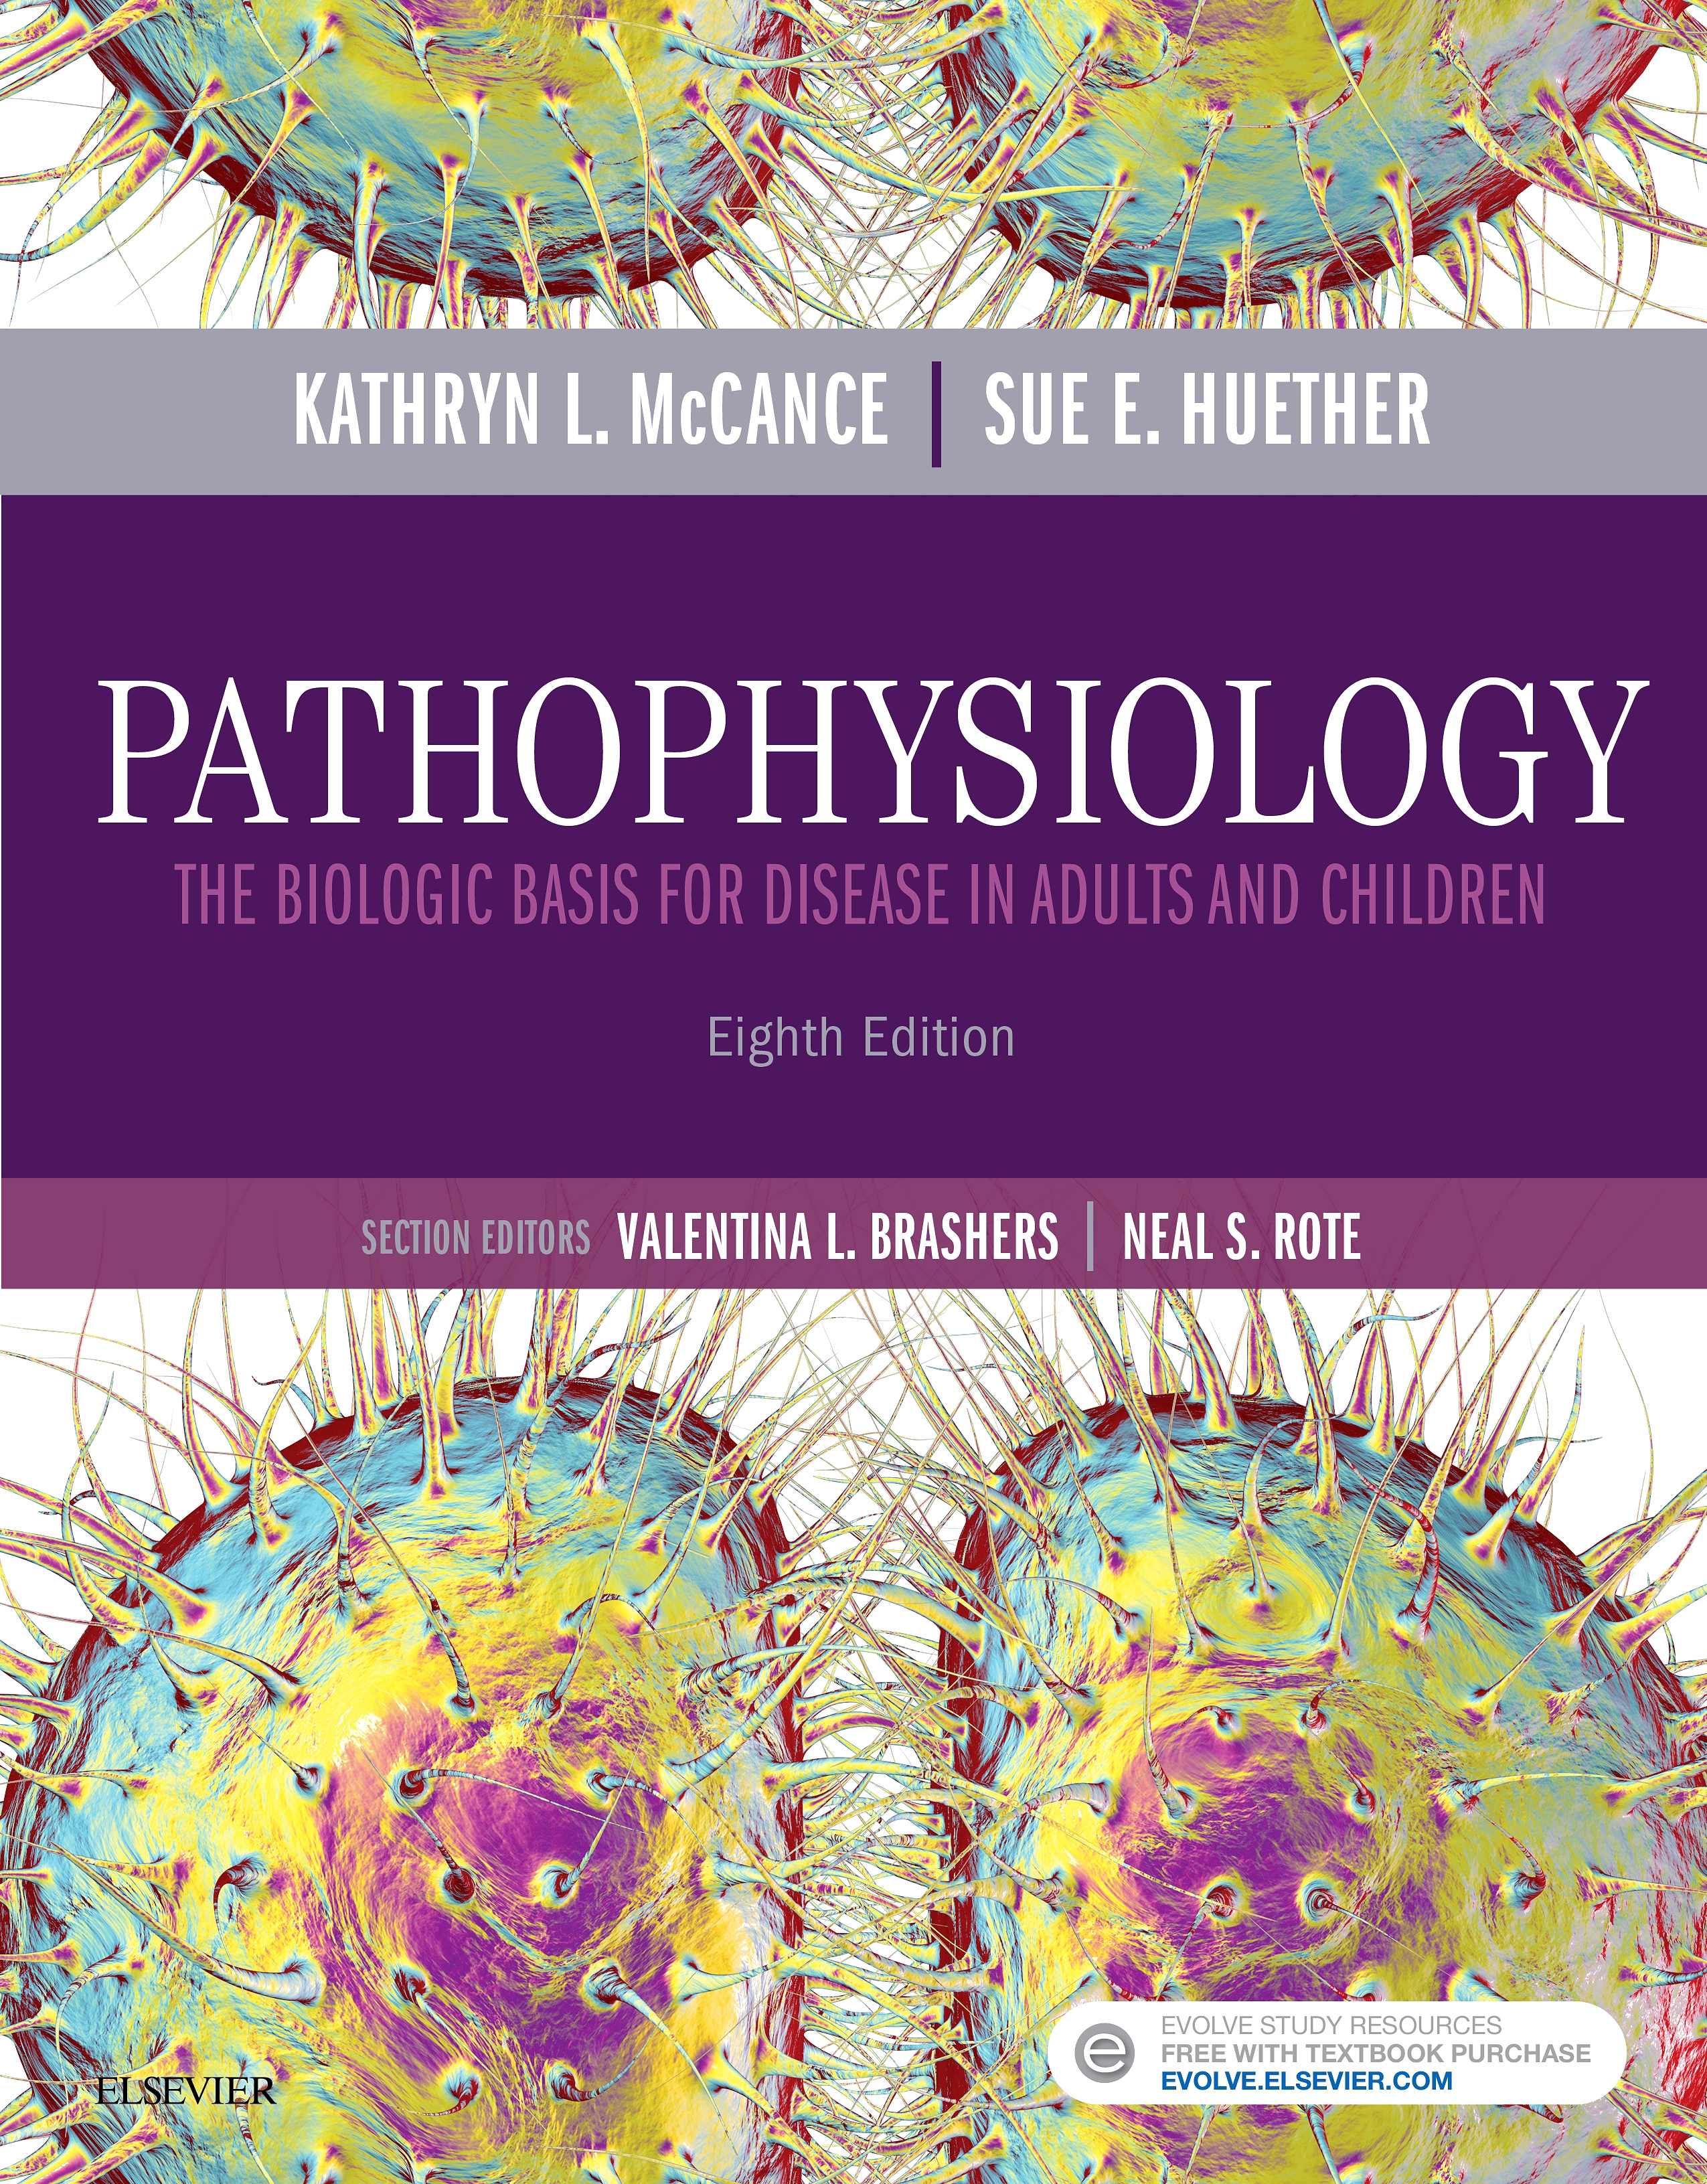 Evolve Resources for Pathophysiology, 8th